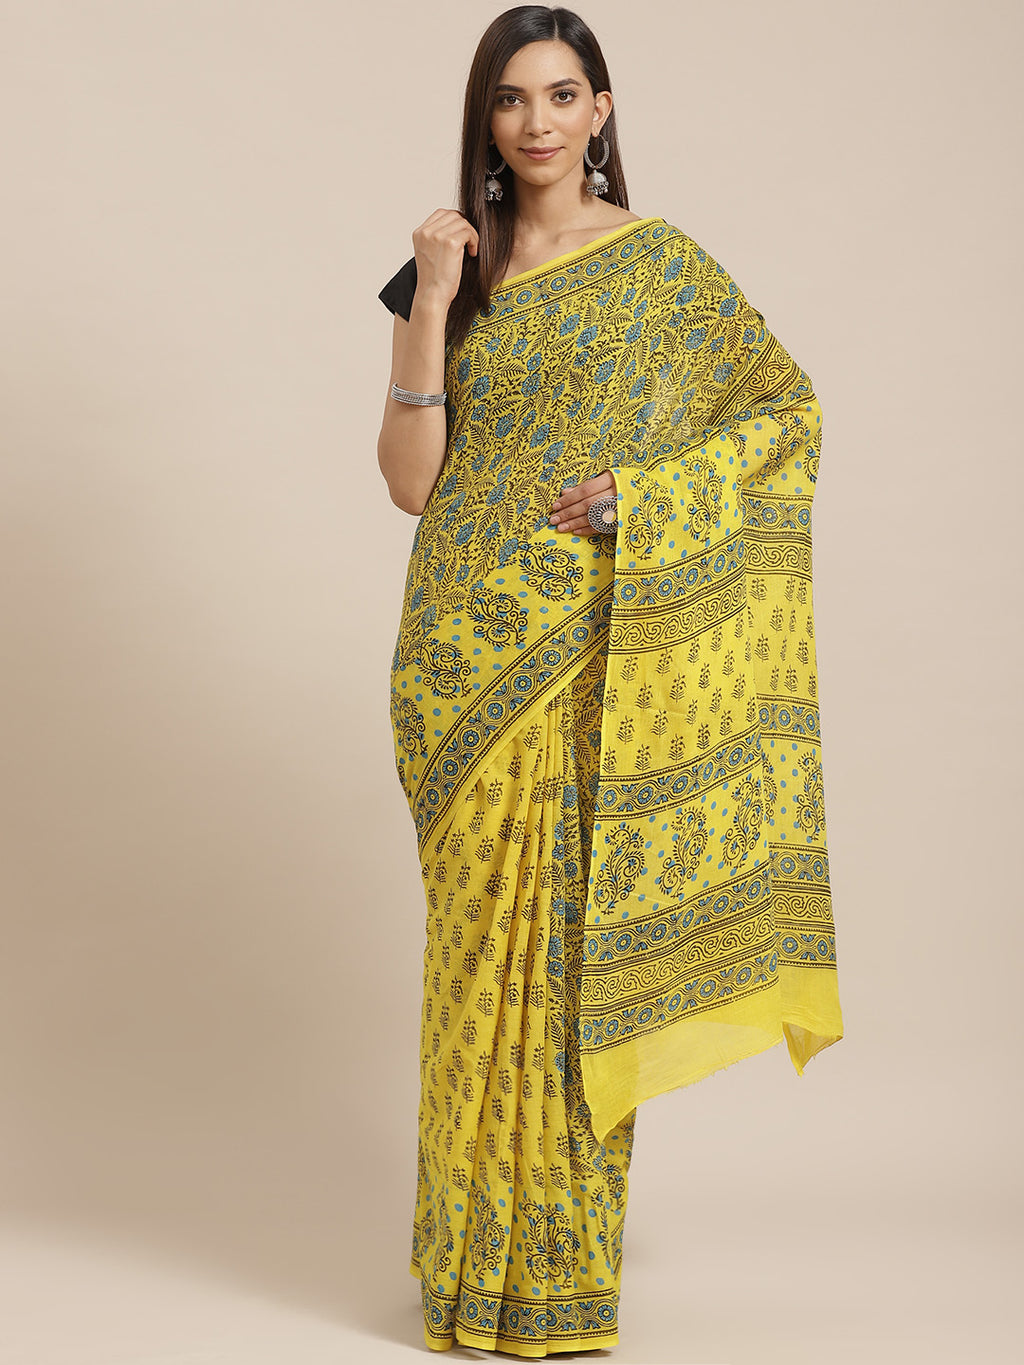 Yellow and Blue, Kalakari India Pure Cotton Hand Block Printed Saree and Blouse BAPASA0093-Saree-Kalakari India-BAPASA0093-Block Print, Cotton, Geographical Indication, Hand Crafted, Heritage Prints, Natural Dyes, Red, Sarees, Sustainable Fabrics, Woven, Yellow-[Linen,Ethnic,wear,Fashionista,Handloom,Handicraft,Indigo,blockprint,block,print,Cotton,Chanderi,Blue, latest,classy,party,bollywood,trendy,summer,style,traditional,formal,elegant,unique,style,hand,block,print, dabu,booti,gift,present,gla